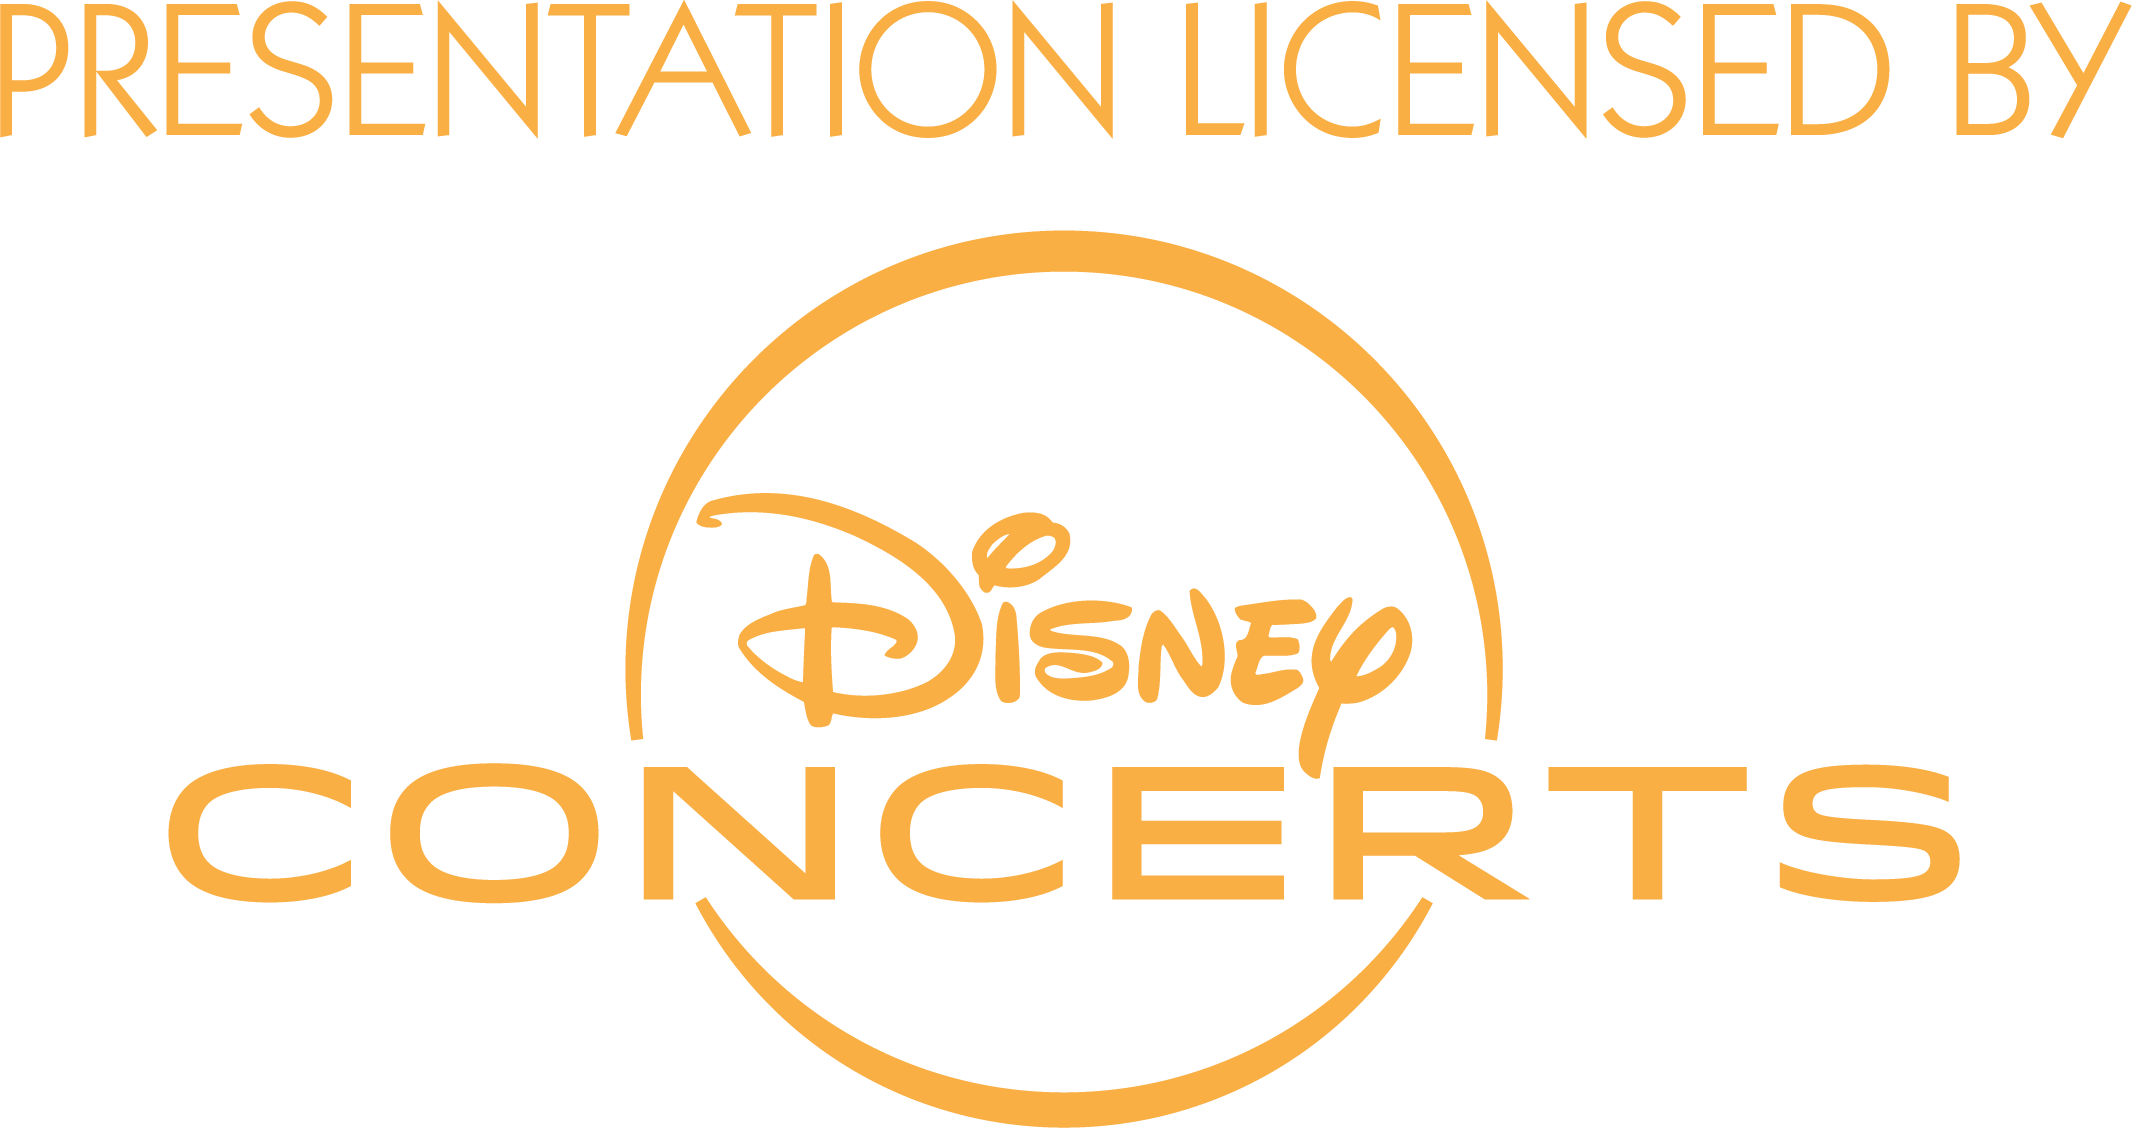 Licenced by Disney Concerts